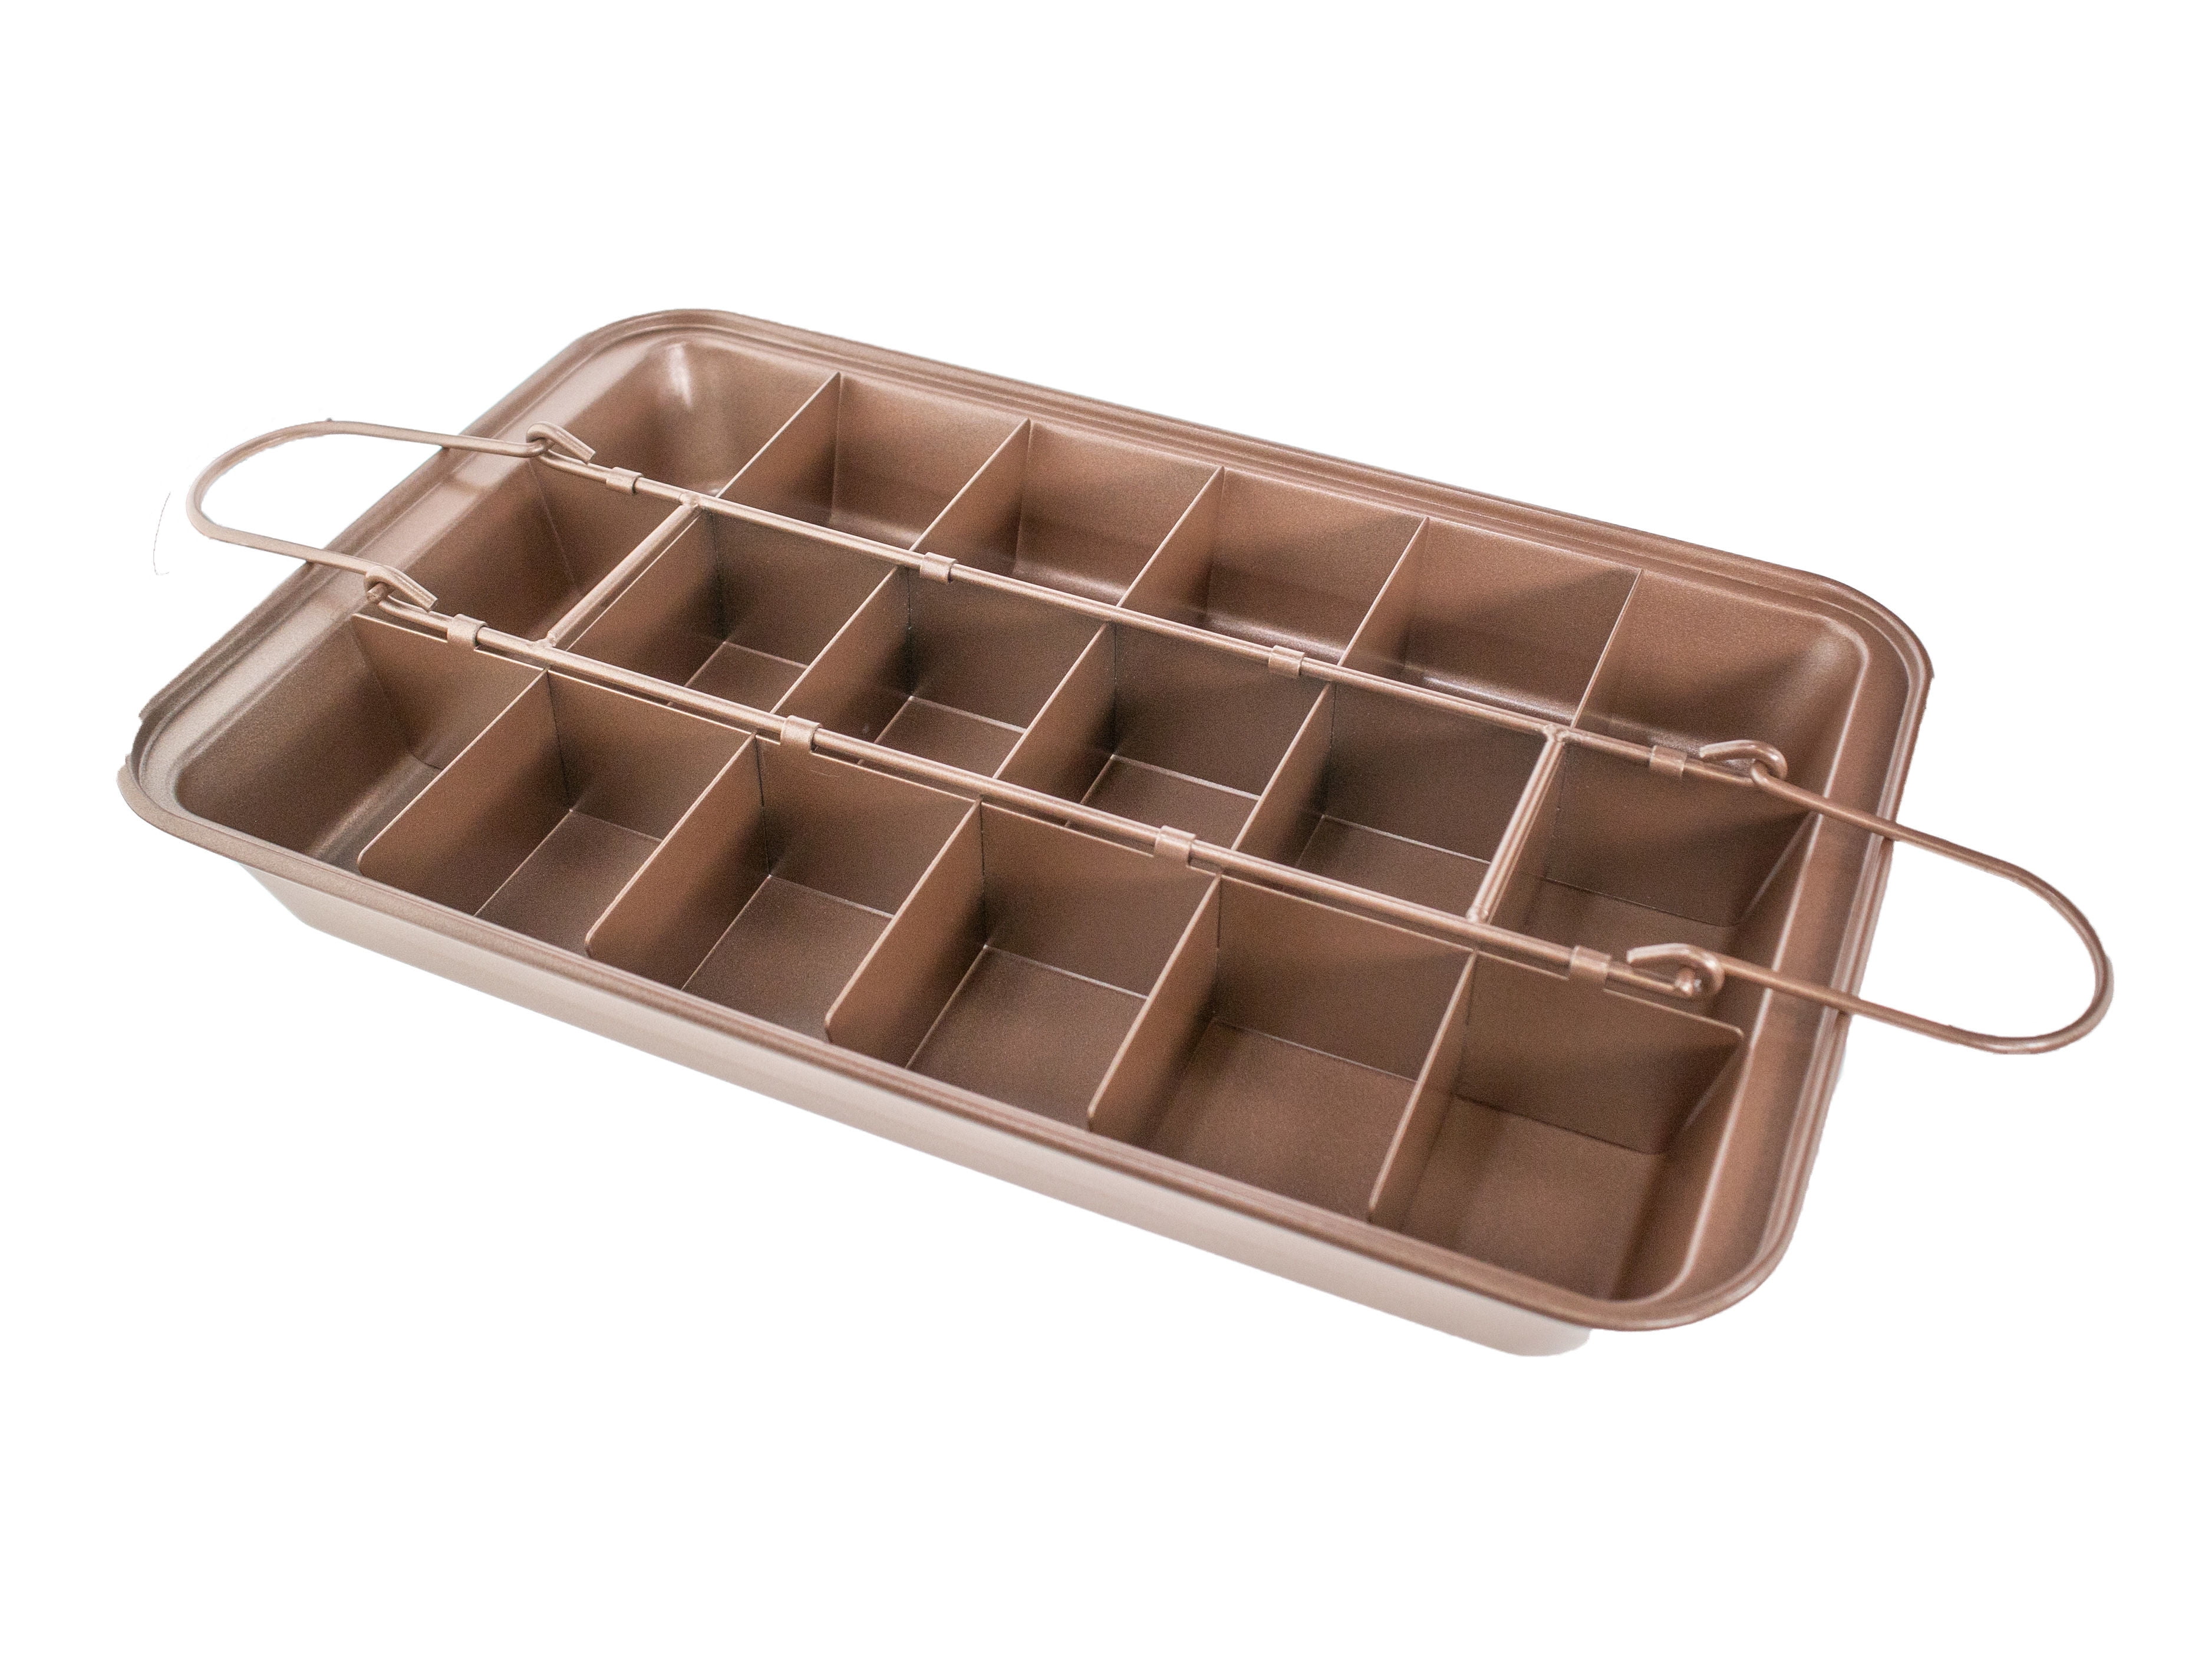  Norpro Nonstick 12-Cavity Linking Brownie Muffin Cupcake Cake  Pan, Squares: Individual Serving Bakeware Products: Home & Kitchen